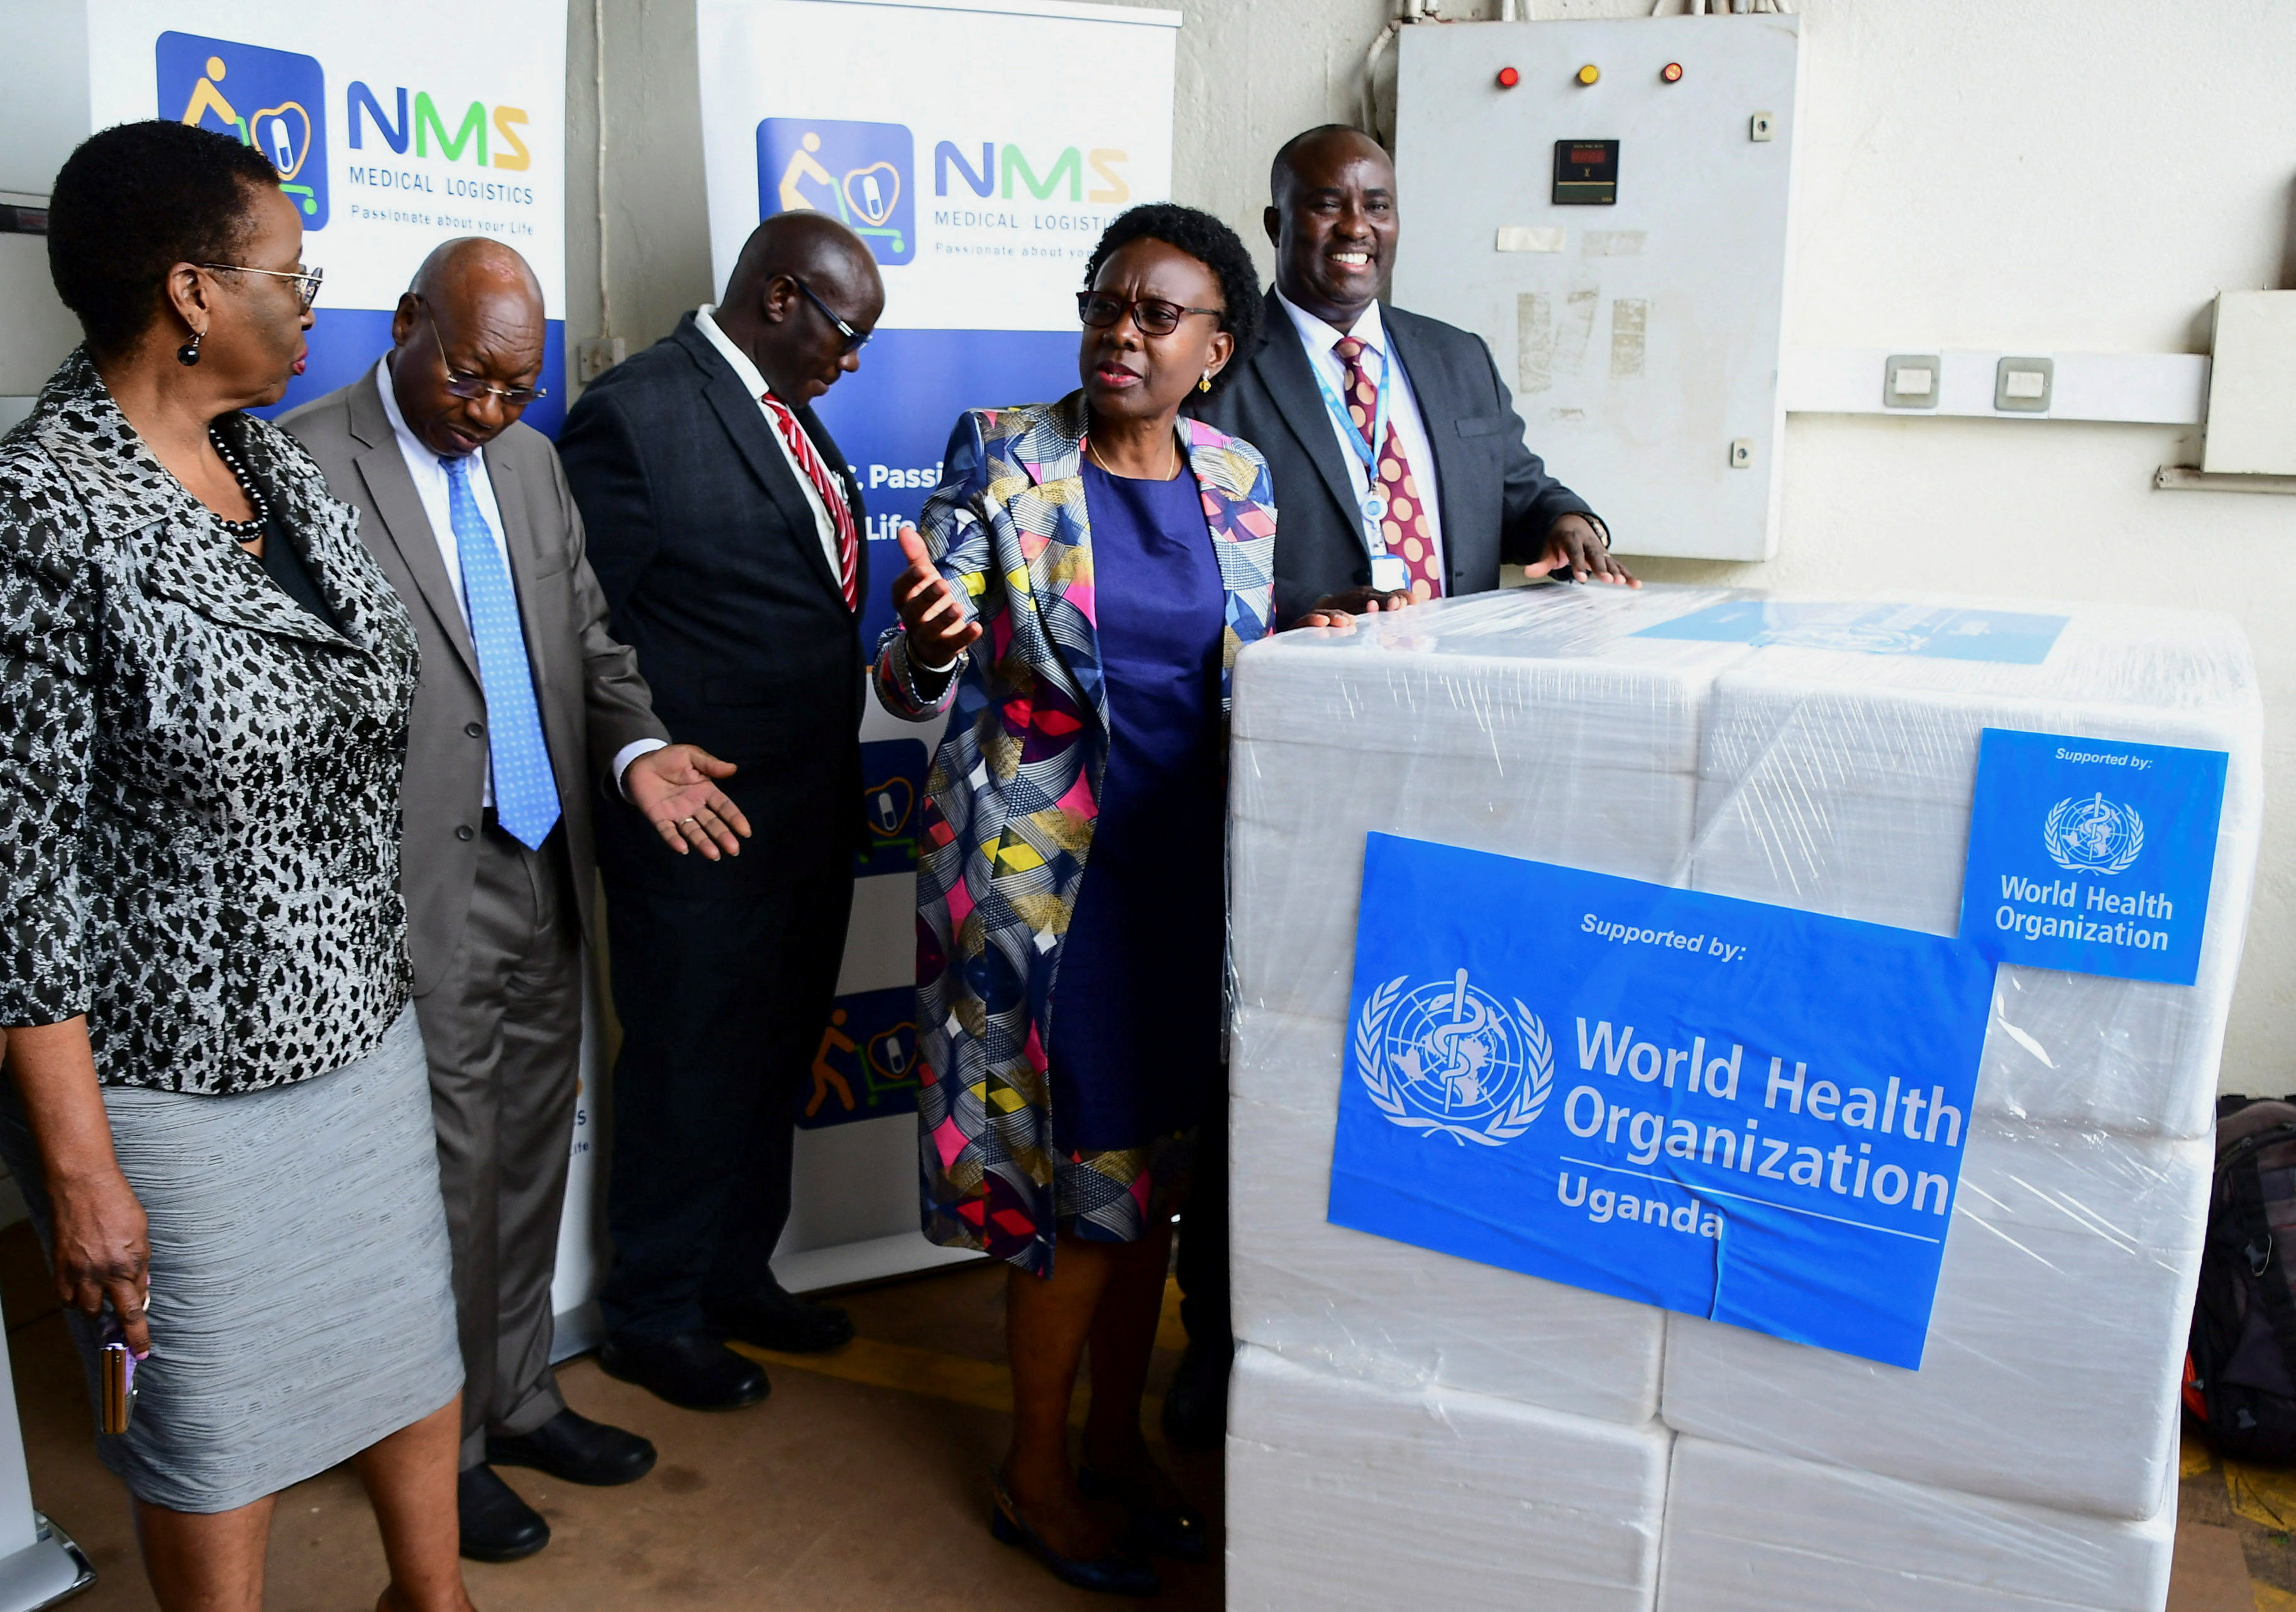 Uganda Health Minister Jane Ruth Aceng address the media after receiving a shipment of 1,200 doses for Ebola vaccine candidates set to be used in a clinical trial at the NMS in Entebbe